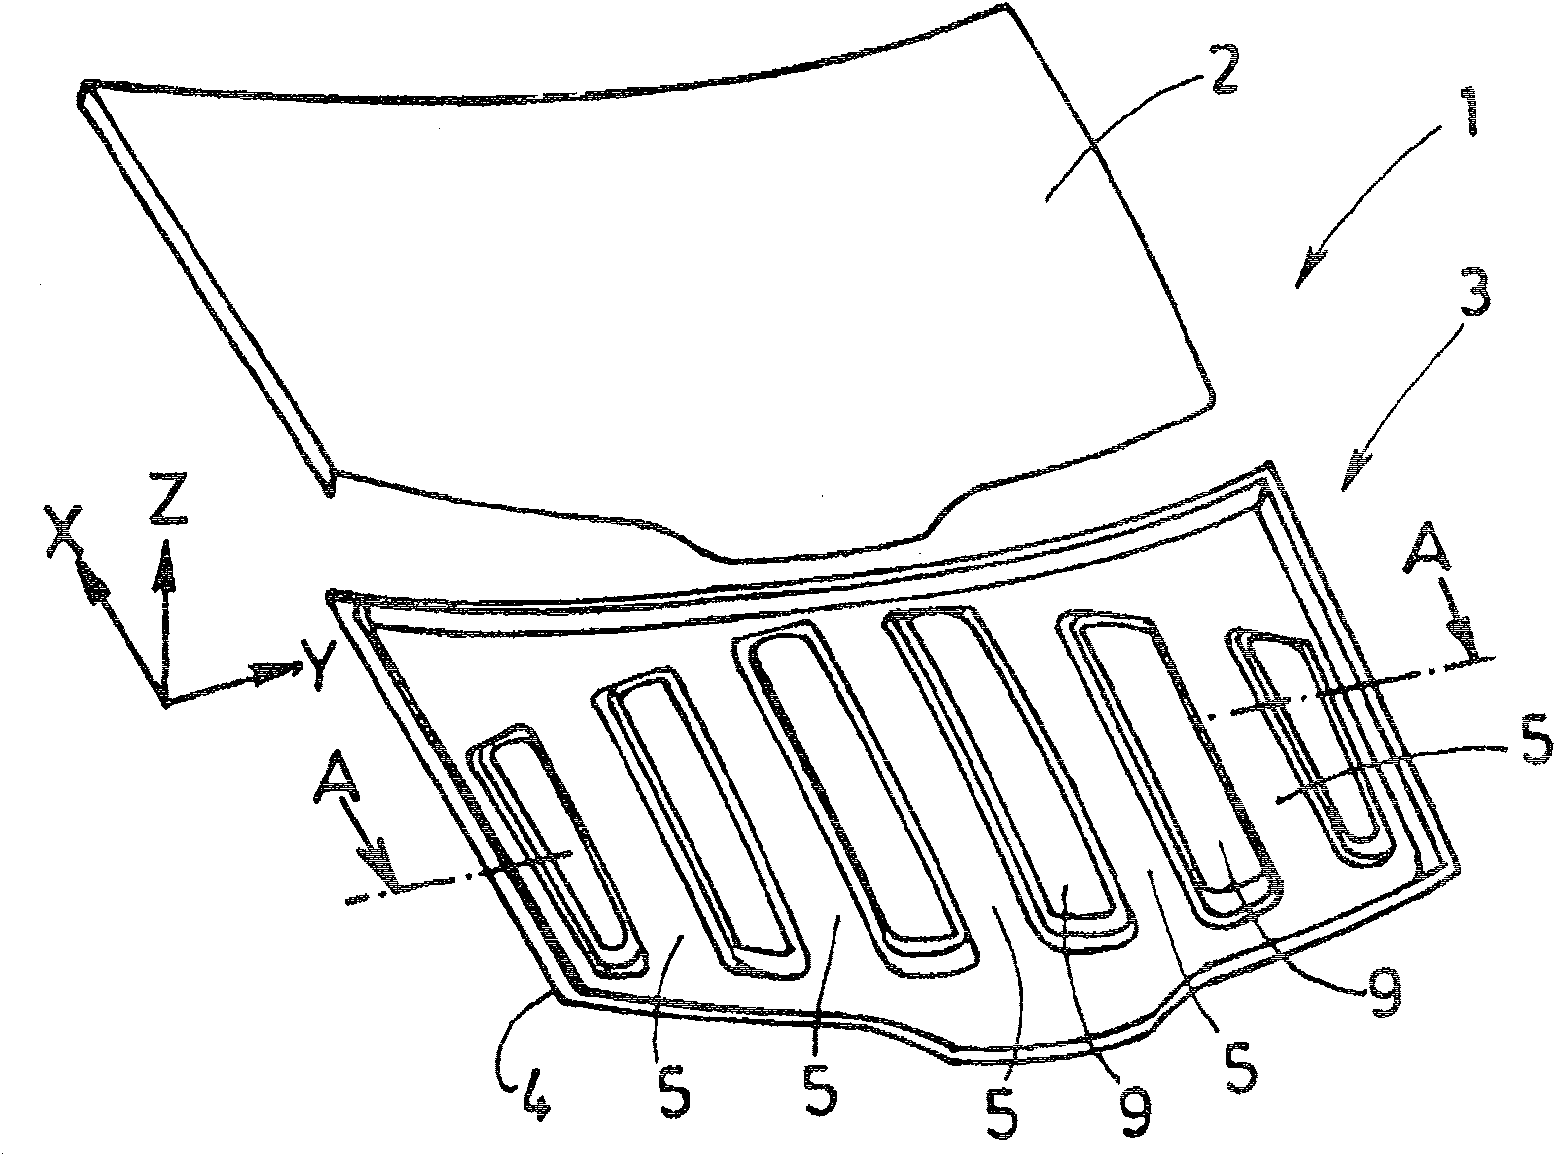 Motor vehicle hood provided with a reinforced lining